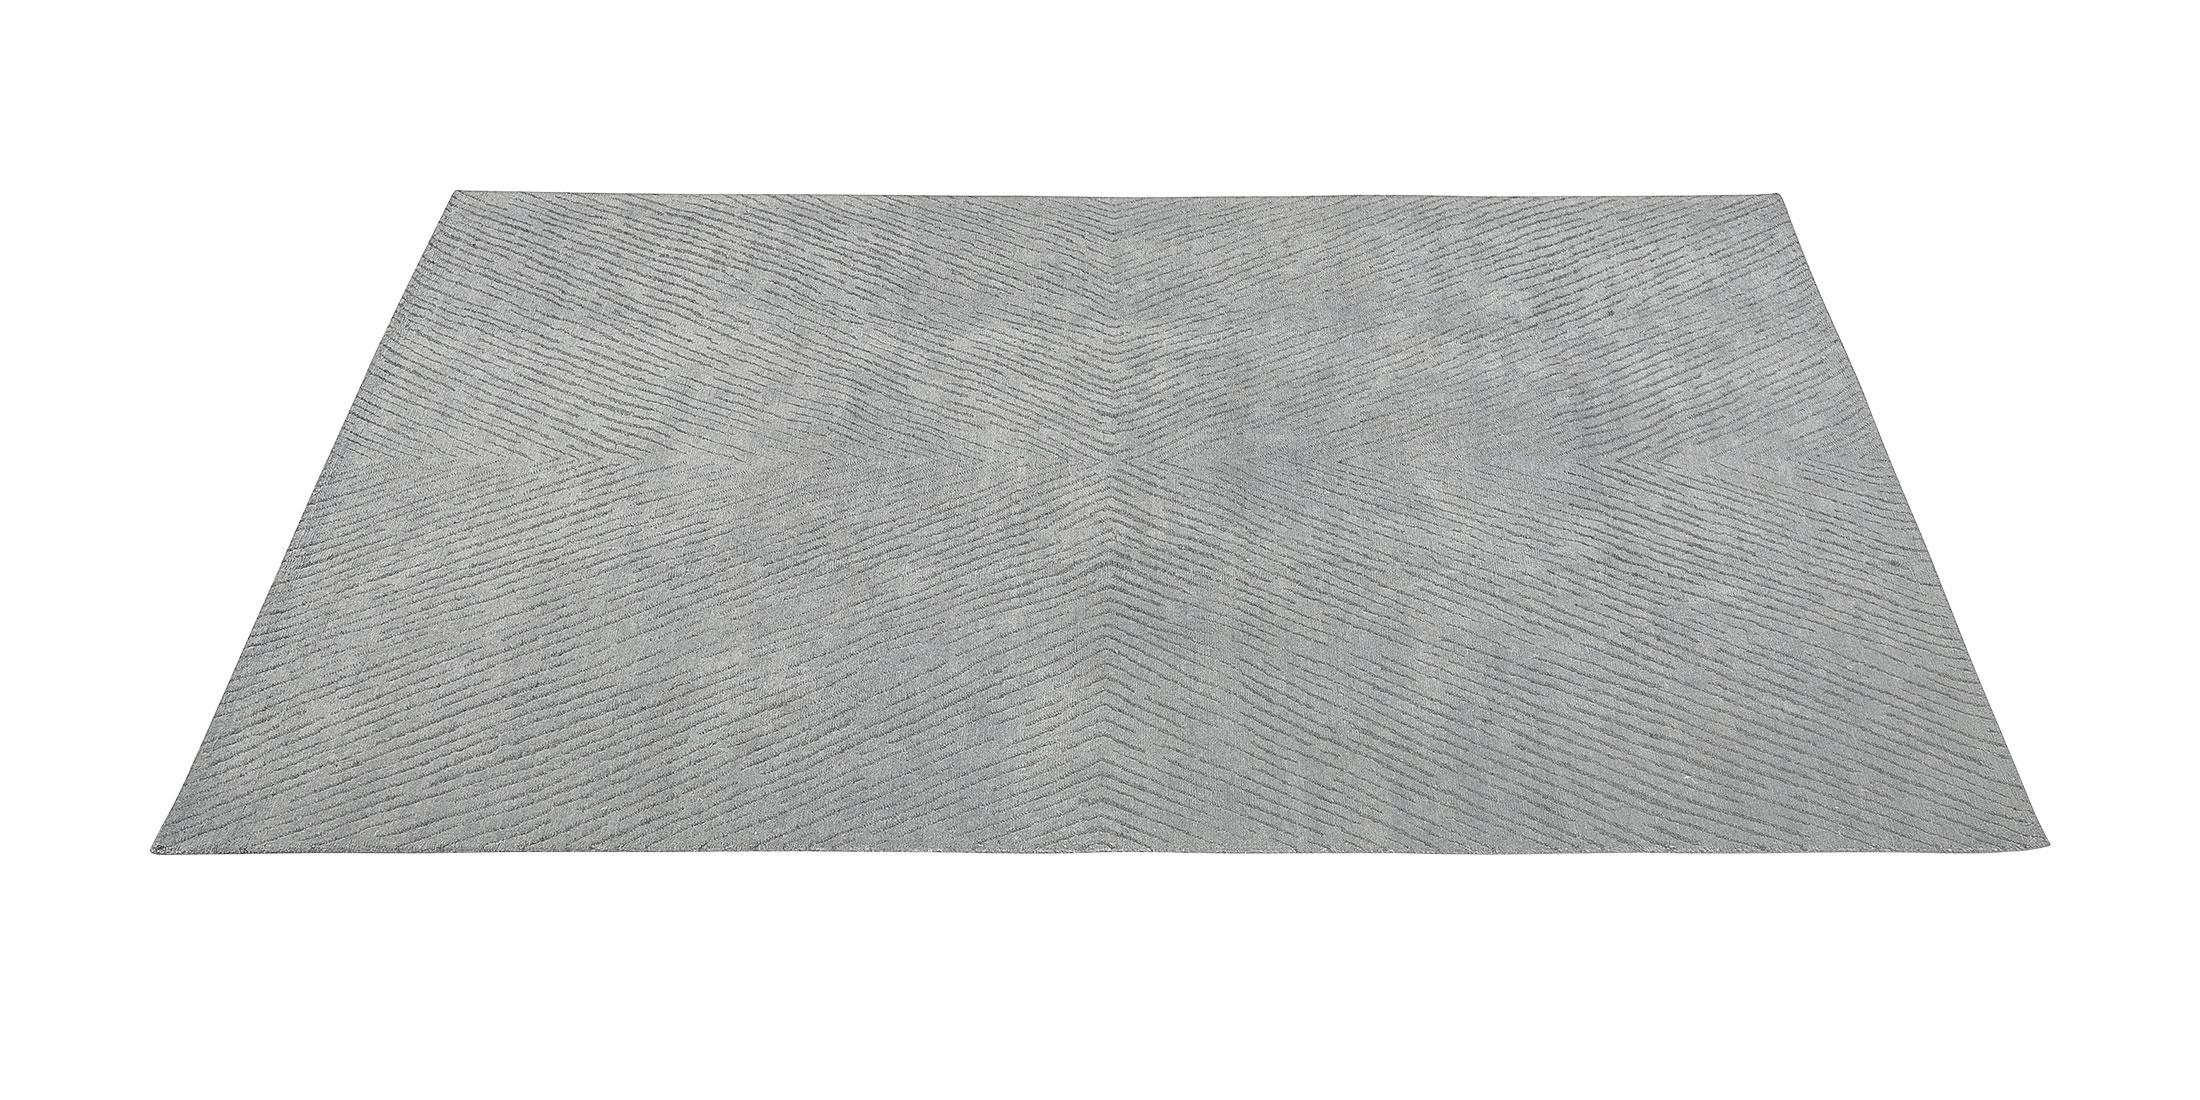 For Sale: Gray (Nickel/Carbon) Ben Soleimani Performance Setta Rug– Handknotted Soft Pile Nickel/Carbon 9'x12' 2